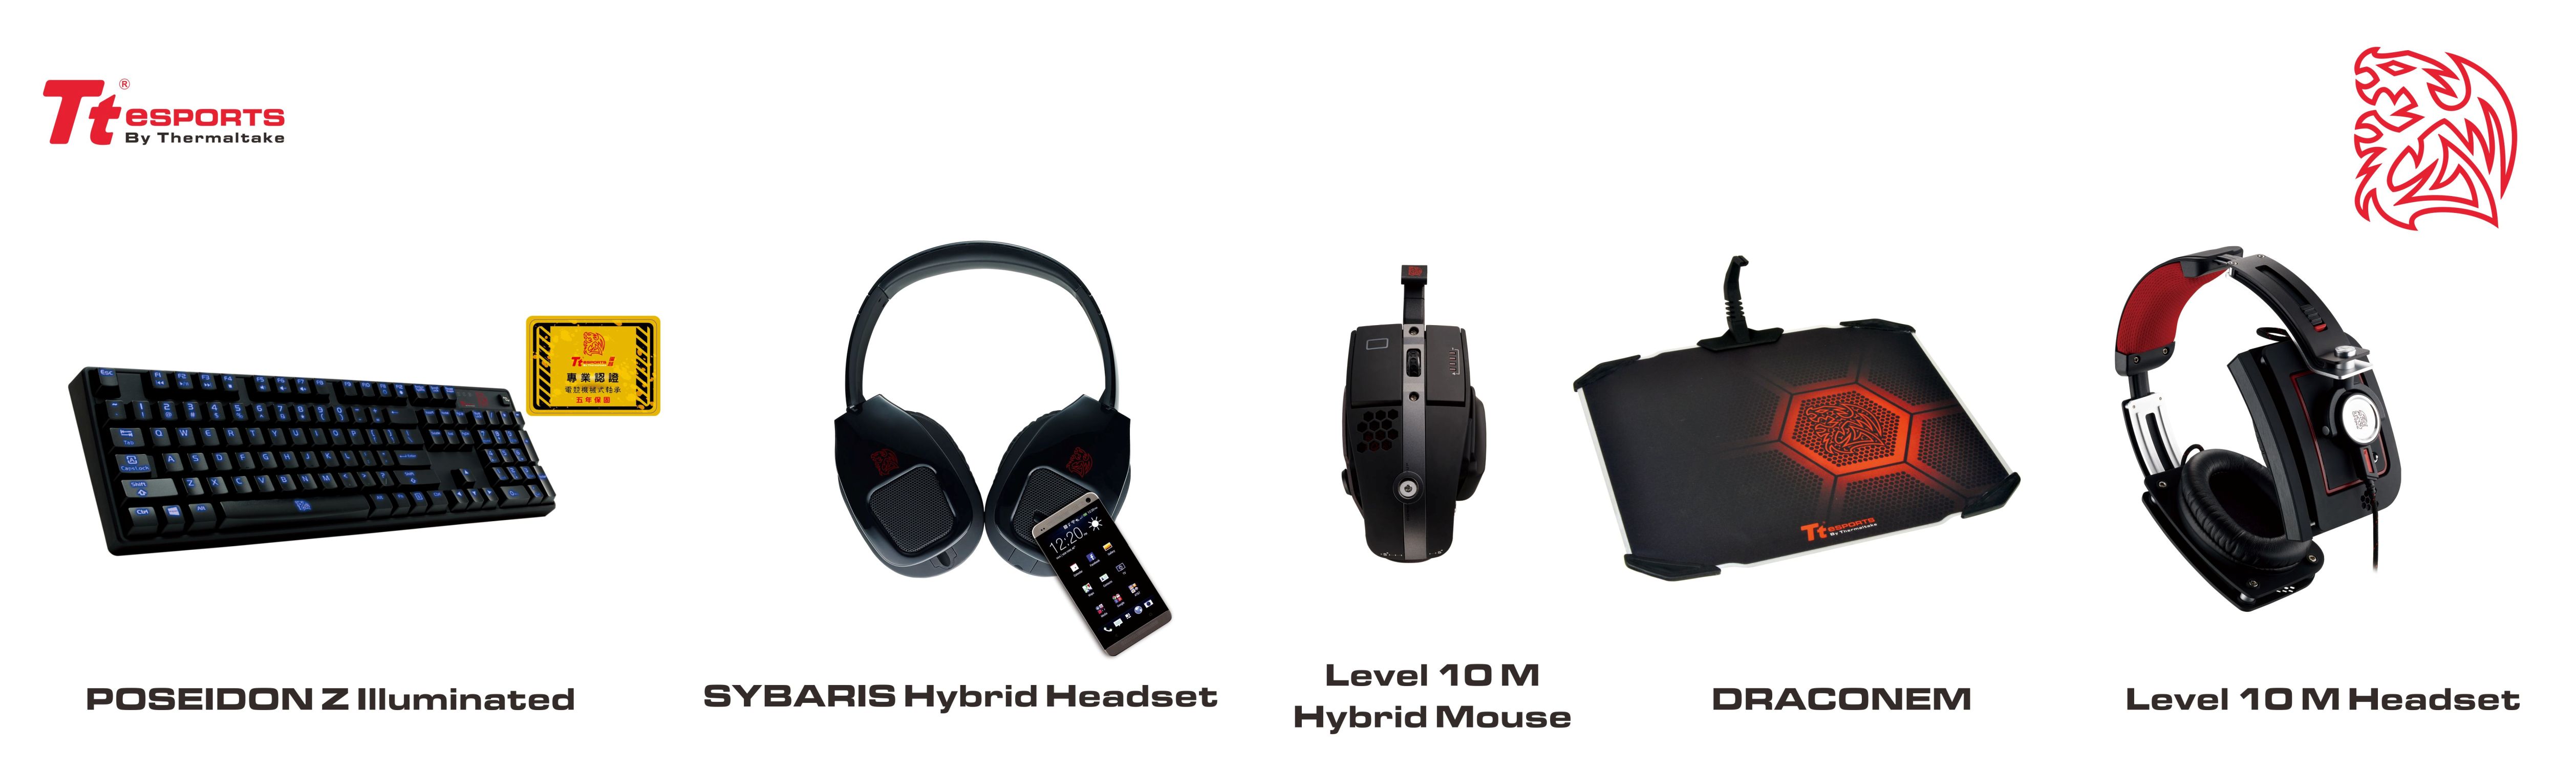 Tt eSPORTS at the CES 2014 – Leading the way for gaming gear World Premier of the Level 10 M Hybrid Mouse‧SYBARIS Hybrid Headset‧POSEIDON Z Illuminated Keyboard